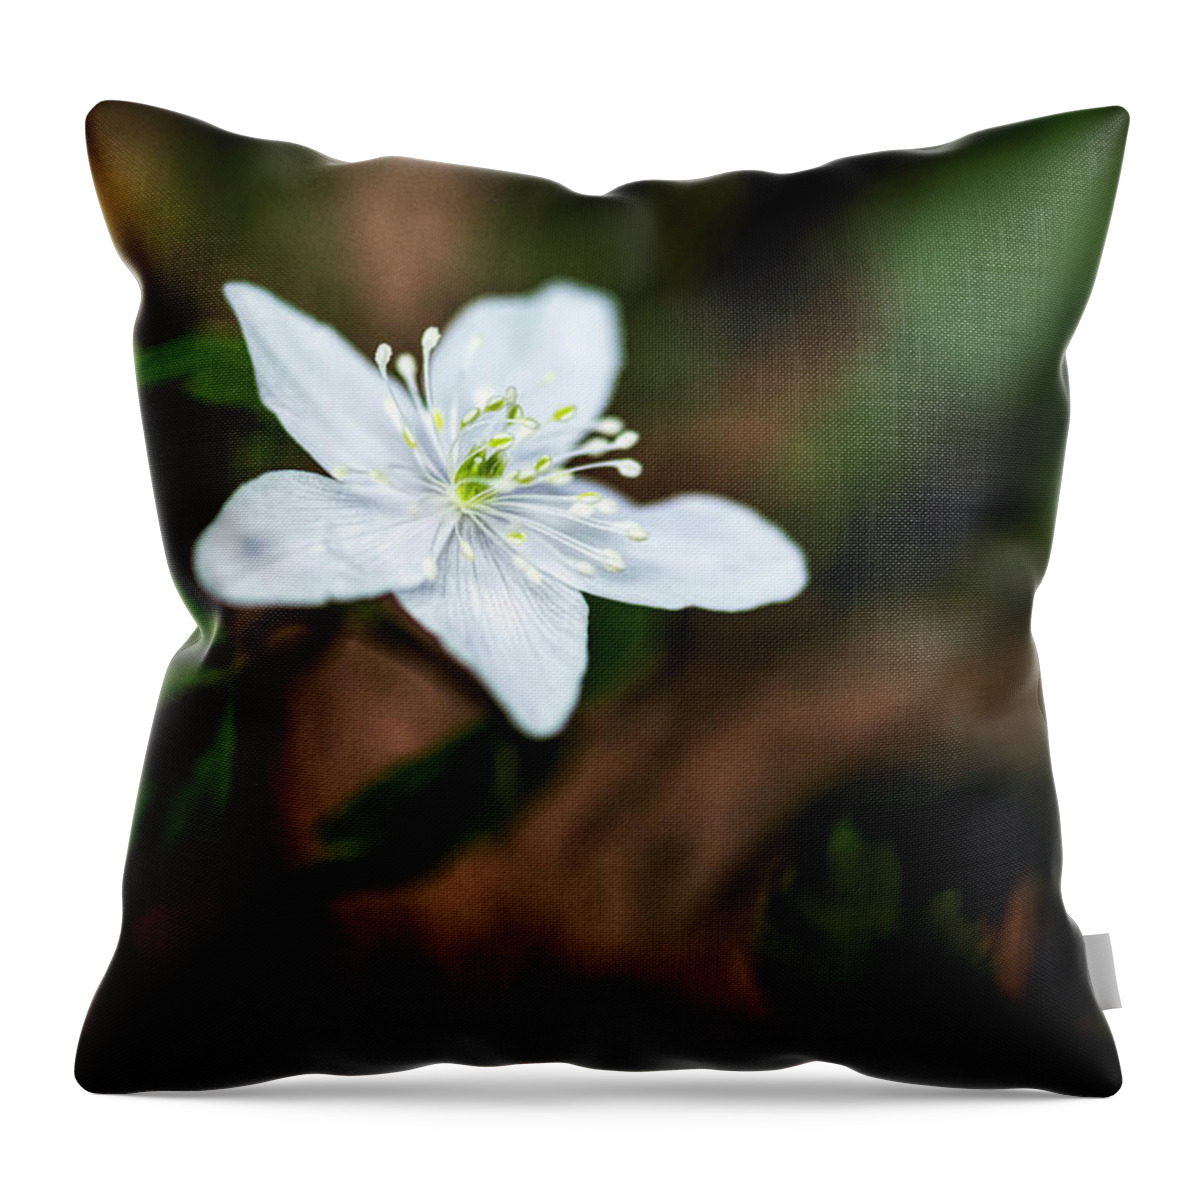 Wild Throw Pillow featuring the photograph Wild Strawberry by Pamela Dunn-Parrish